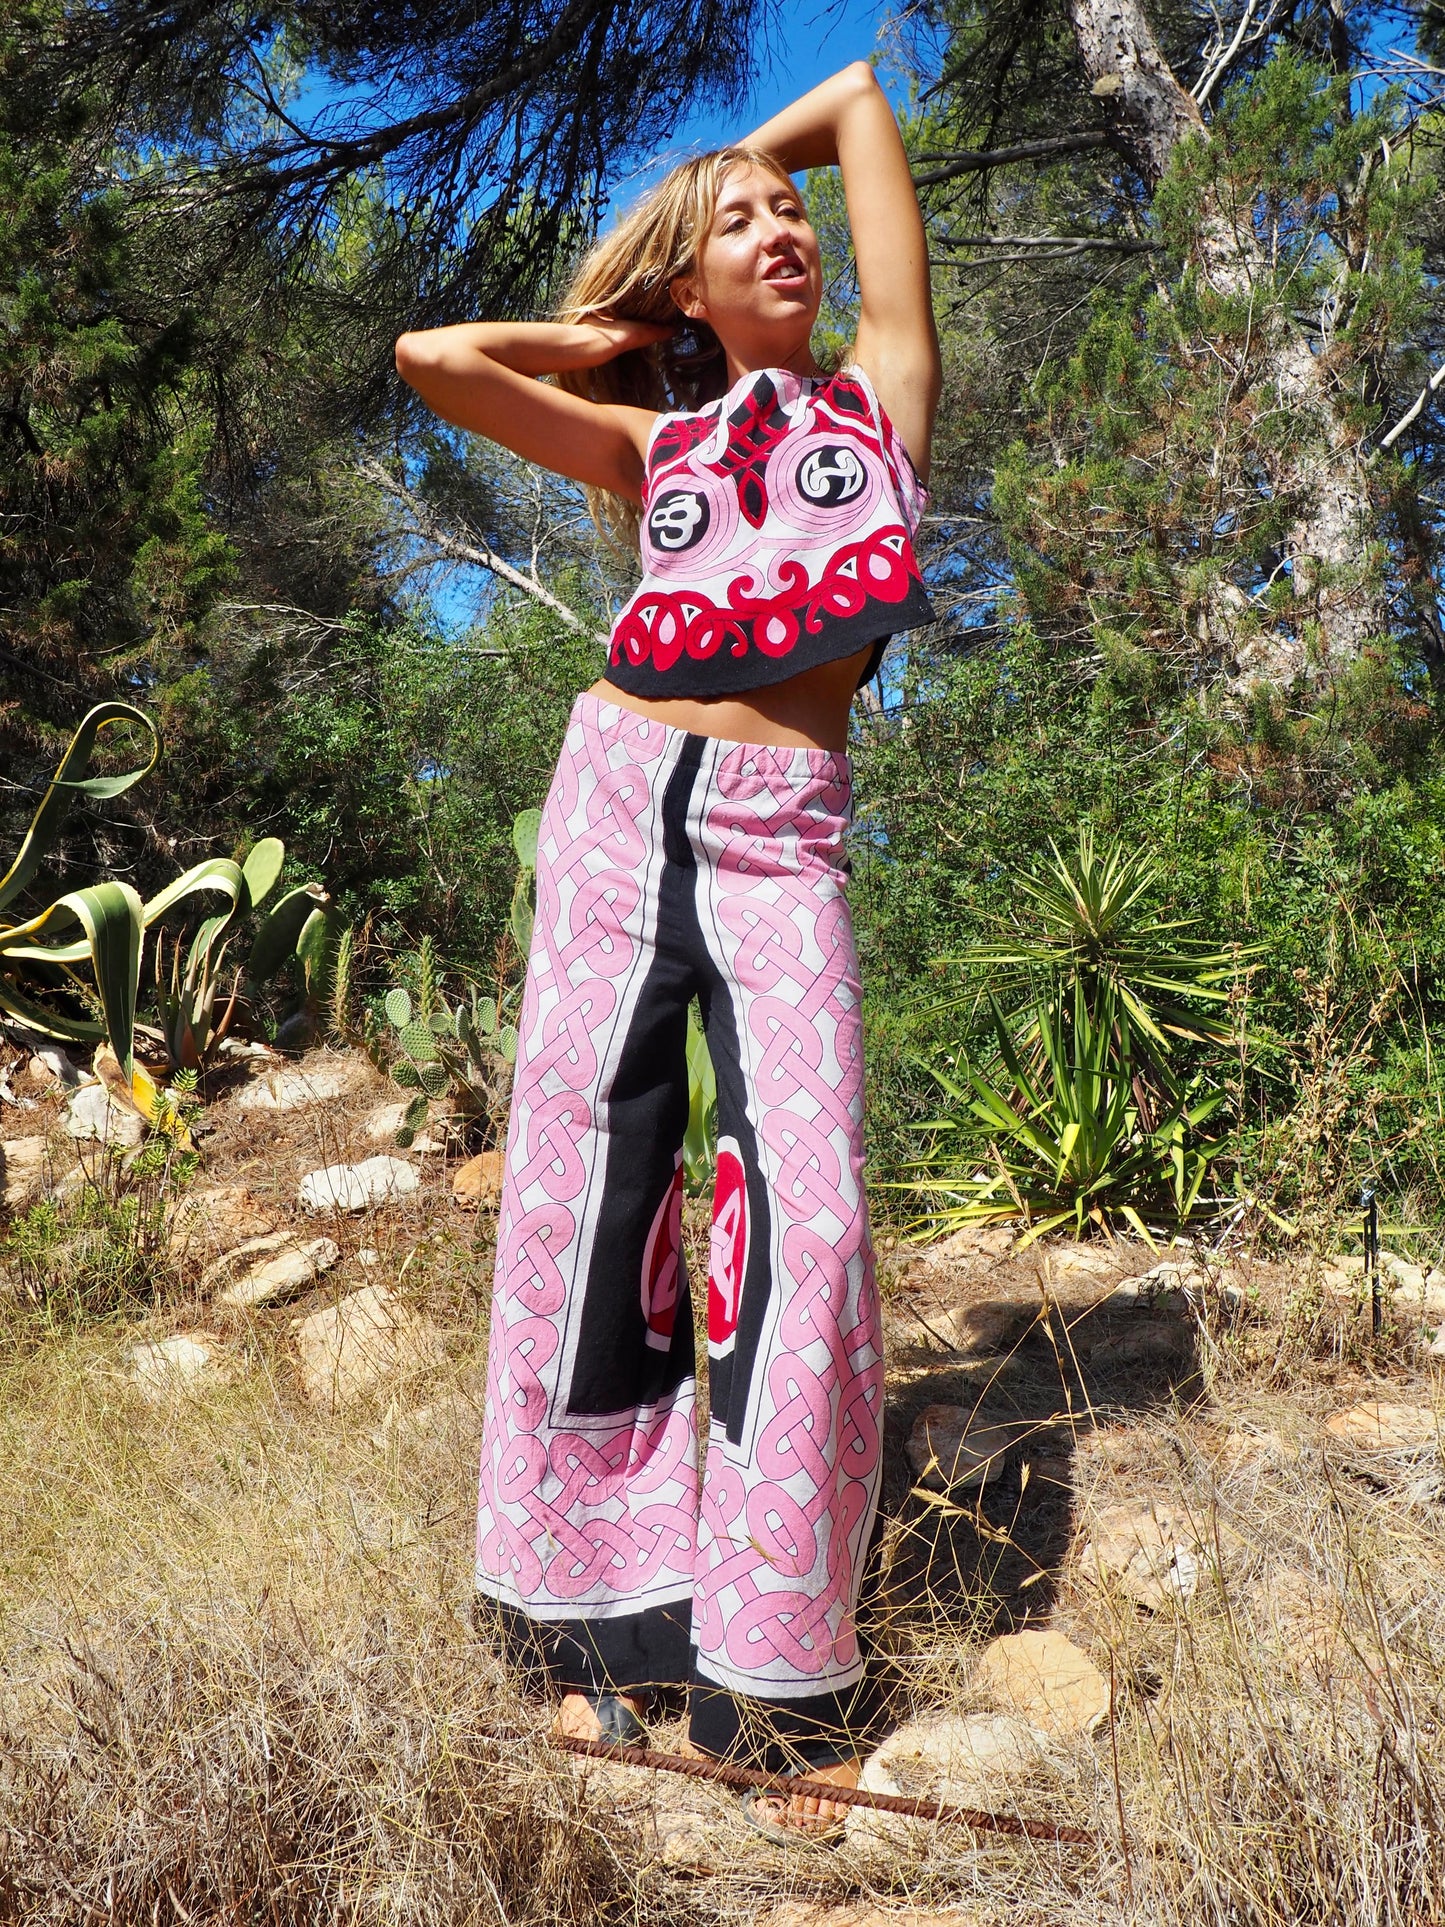 Up-cycled cotton short sleeve crop top in pink and black with vibrant print design and circular motifs by Vagabond Ibiza made